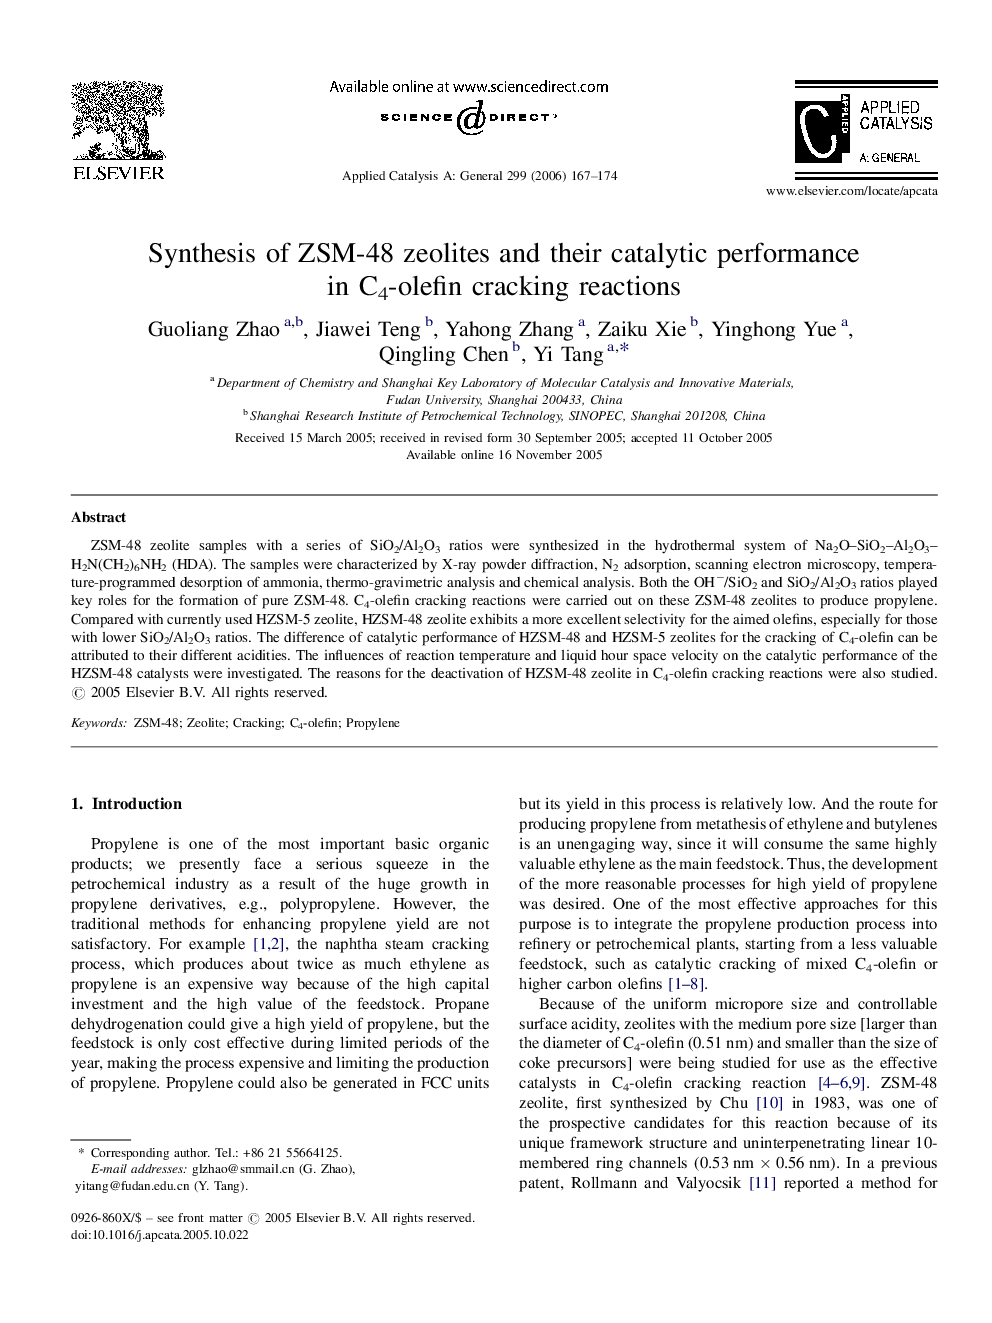 Synthesis of ZSM-48 zeolites and their catalytic performance in C4-olefin cracking reactions